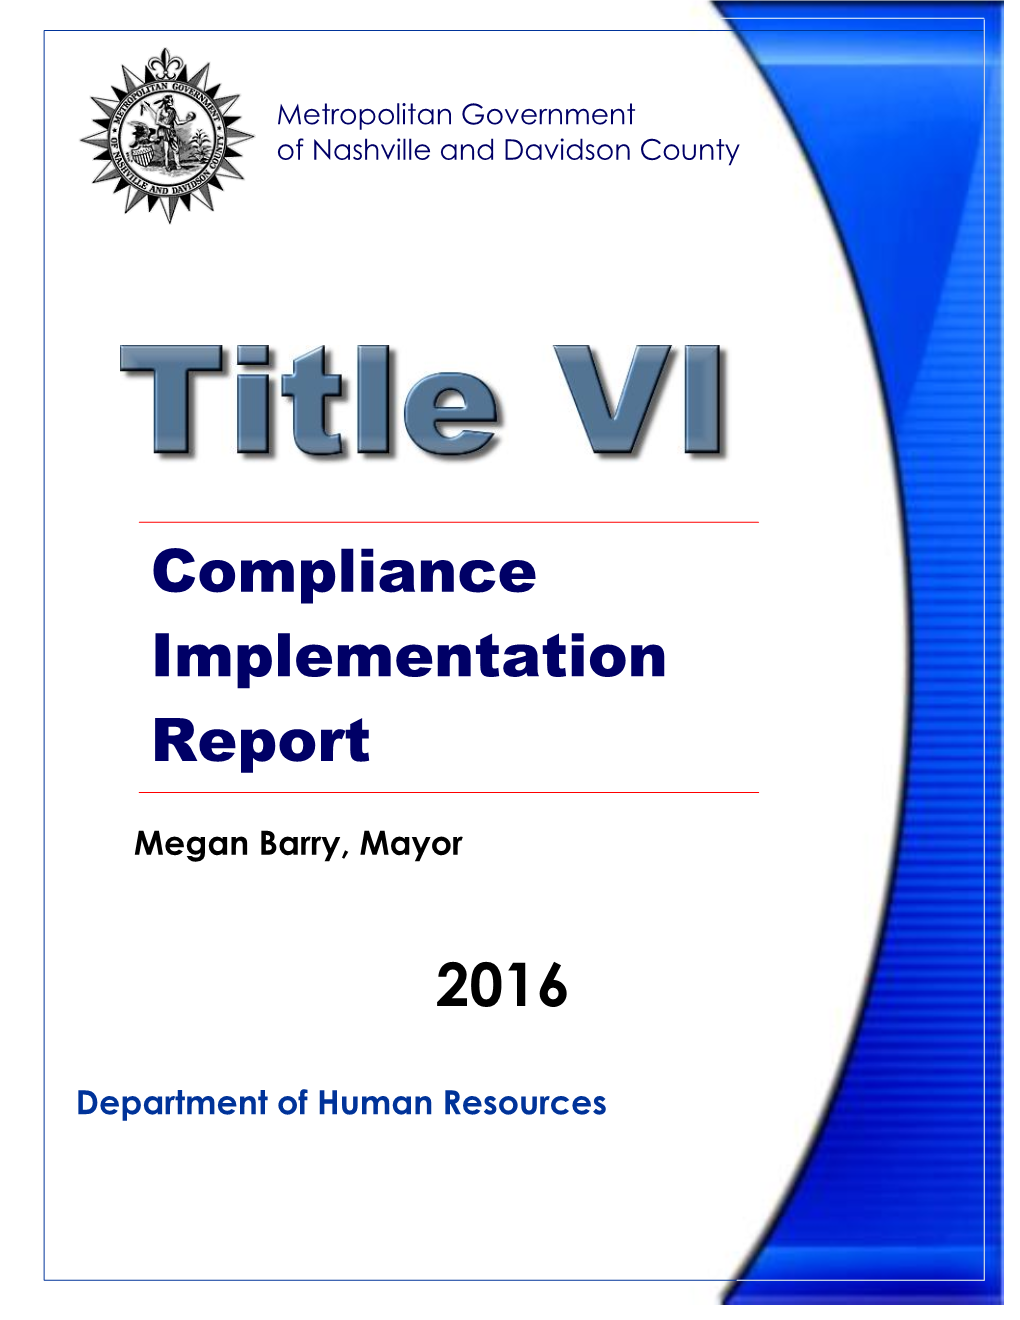 Resources Committed to Title Vi Compliance